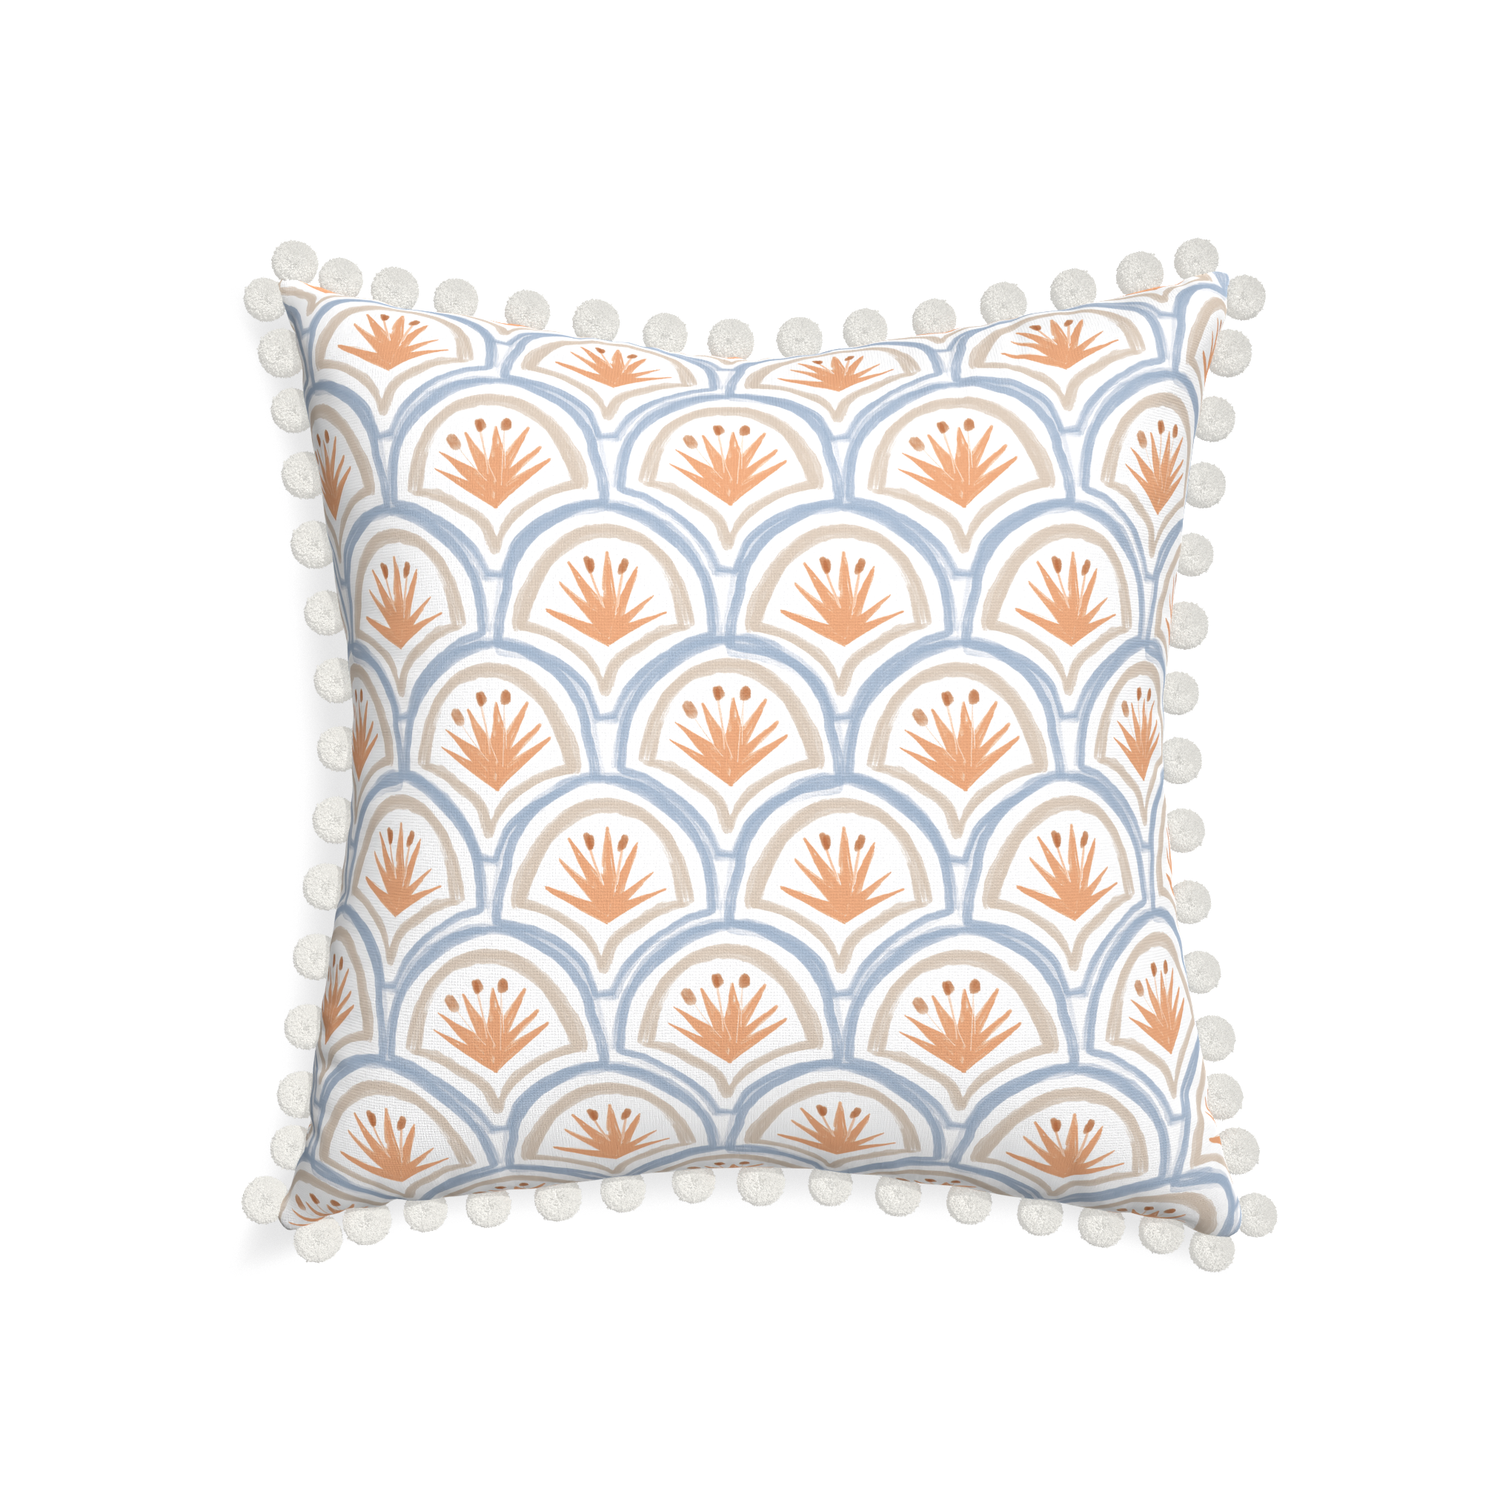 22-square thatcher apricot custom art deco palm patternpillow with snow pom pom on white background